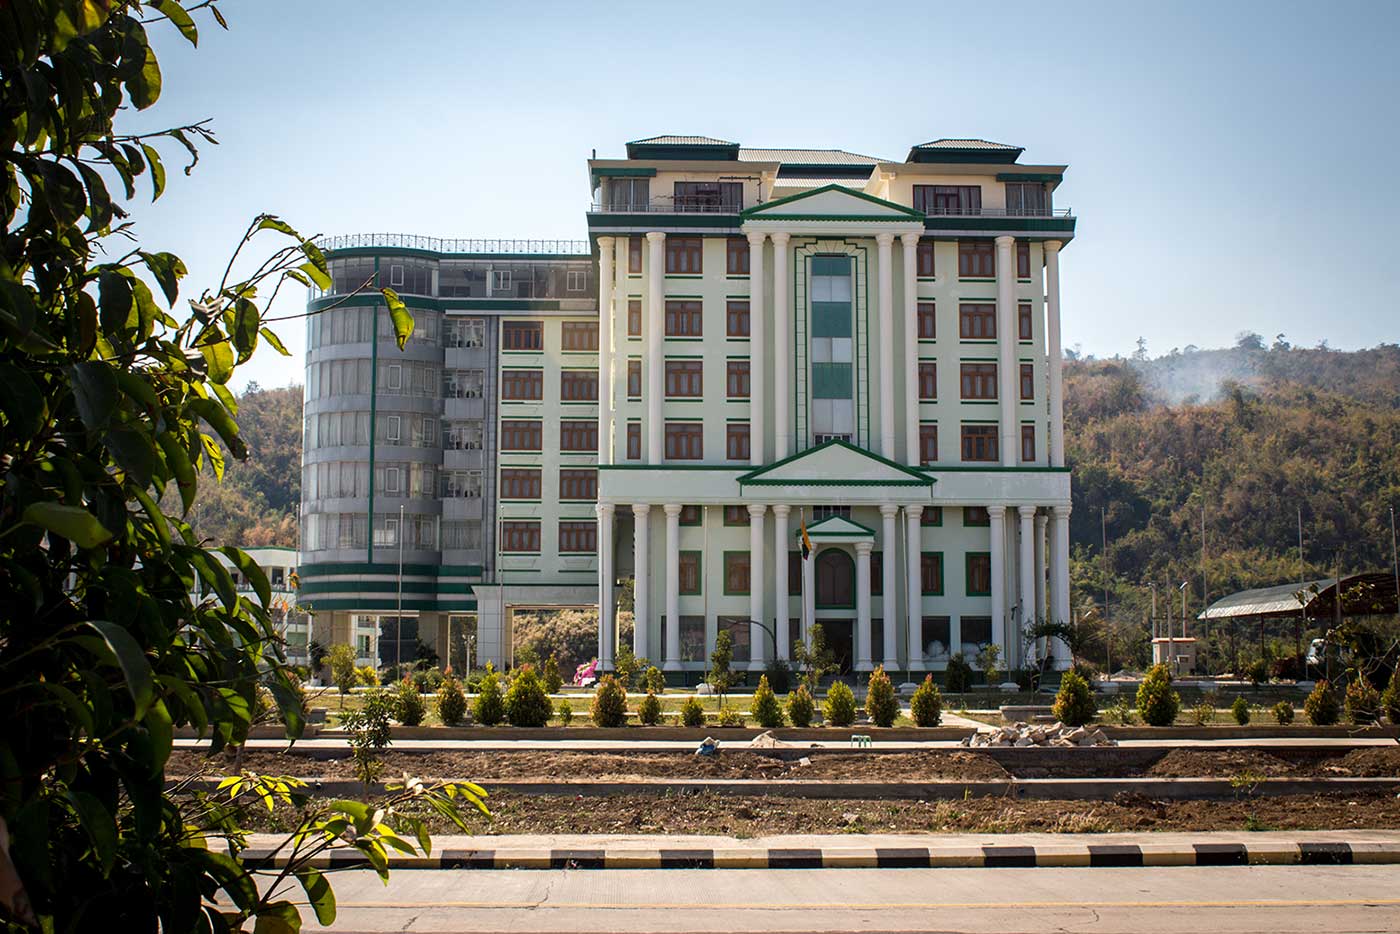 One of 60 unfinished hotels that line the grid-like streets of Hotel Zone 2. Naypyidaw, Myanmar.